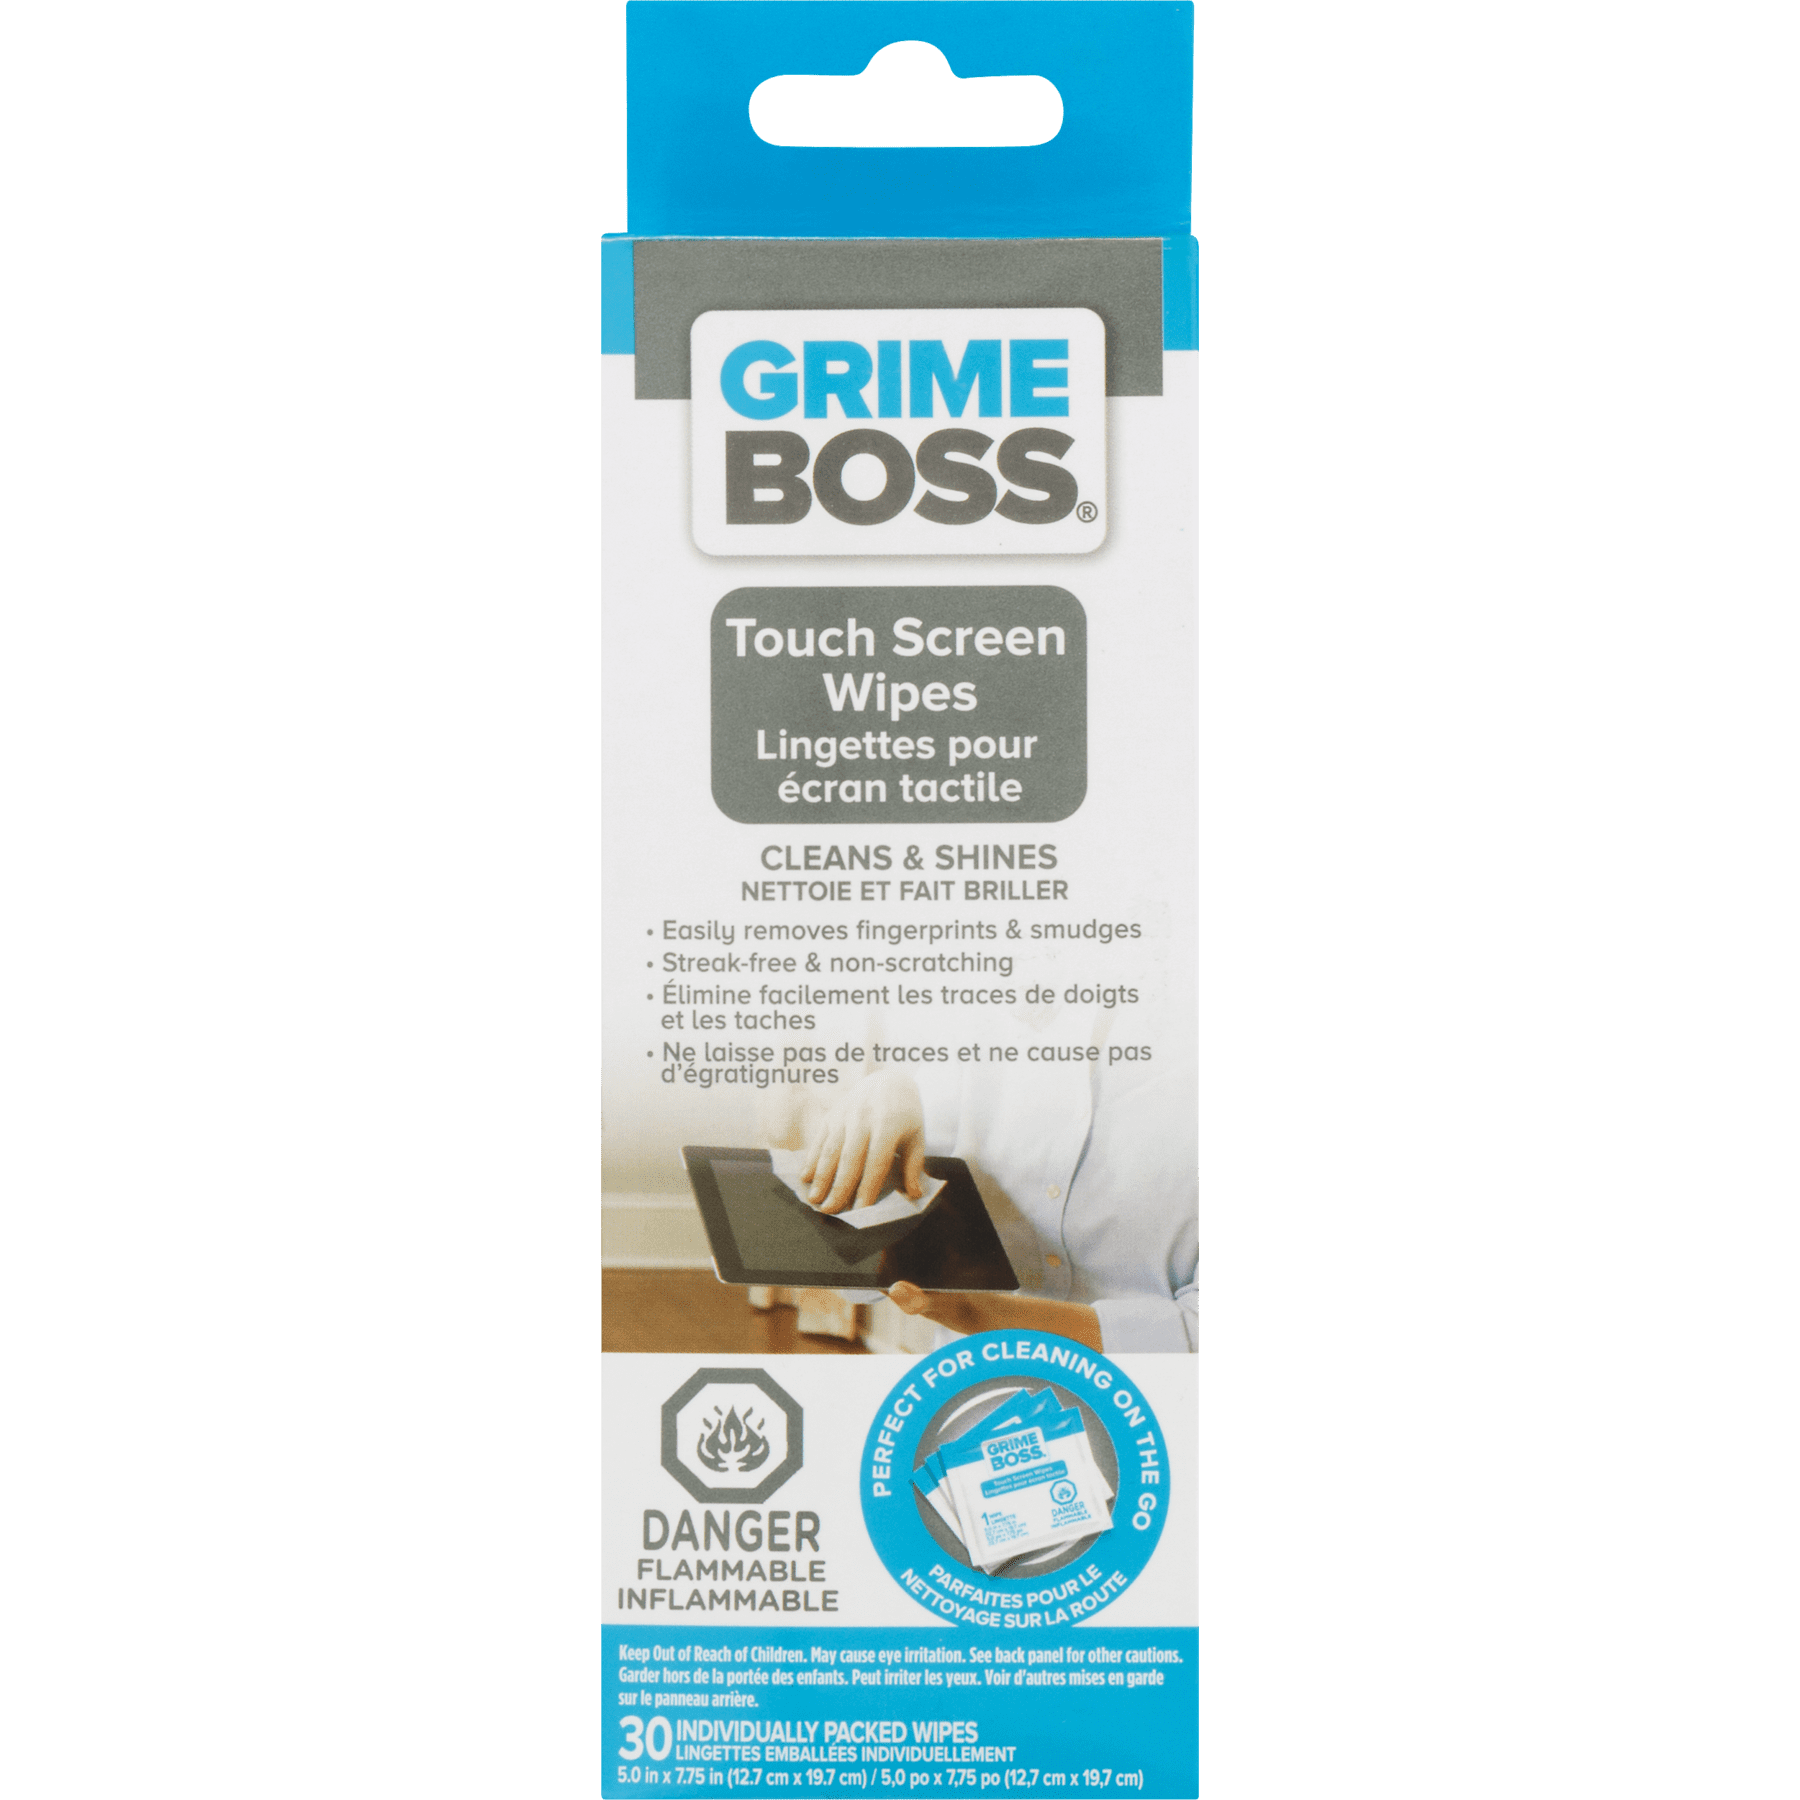 Grime Boss Cleaning Wipes Contractor Endorsement Video